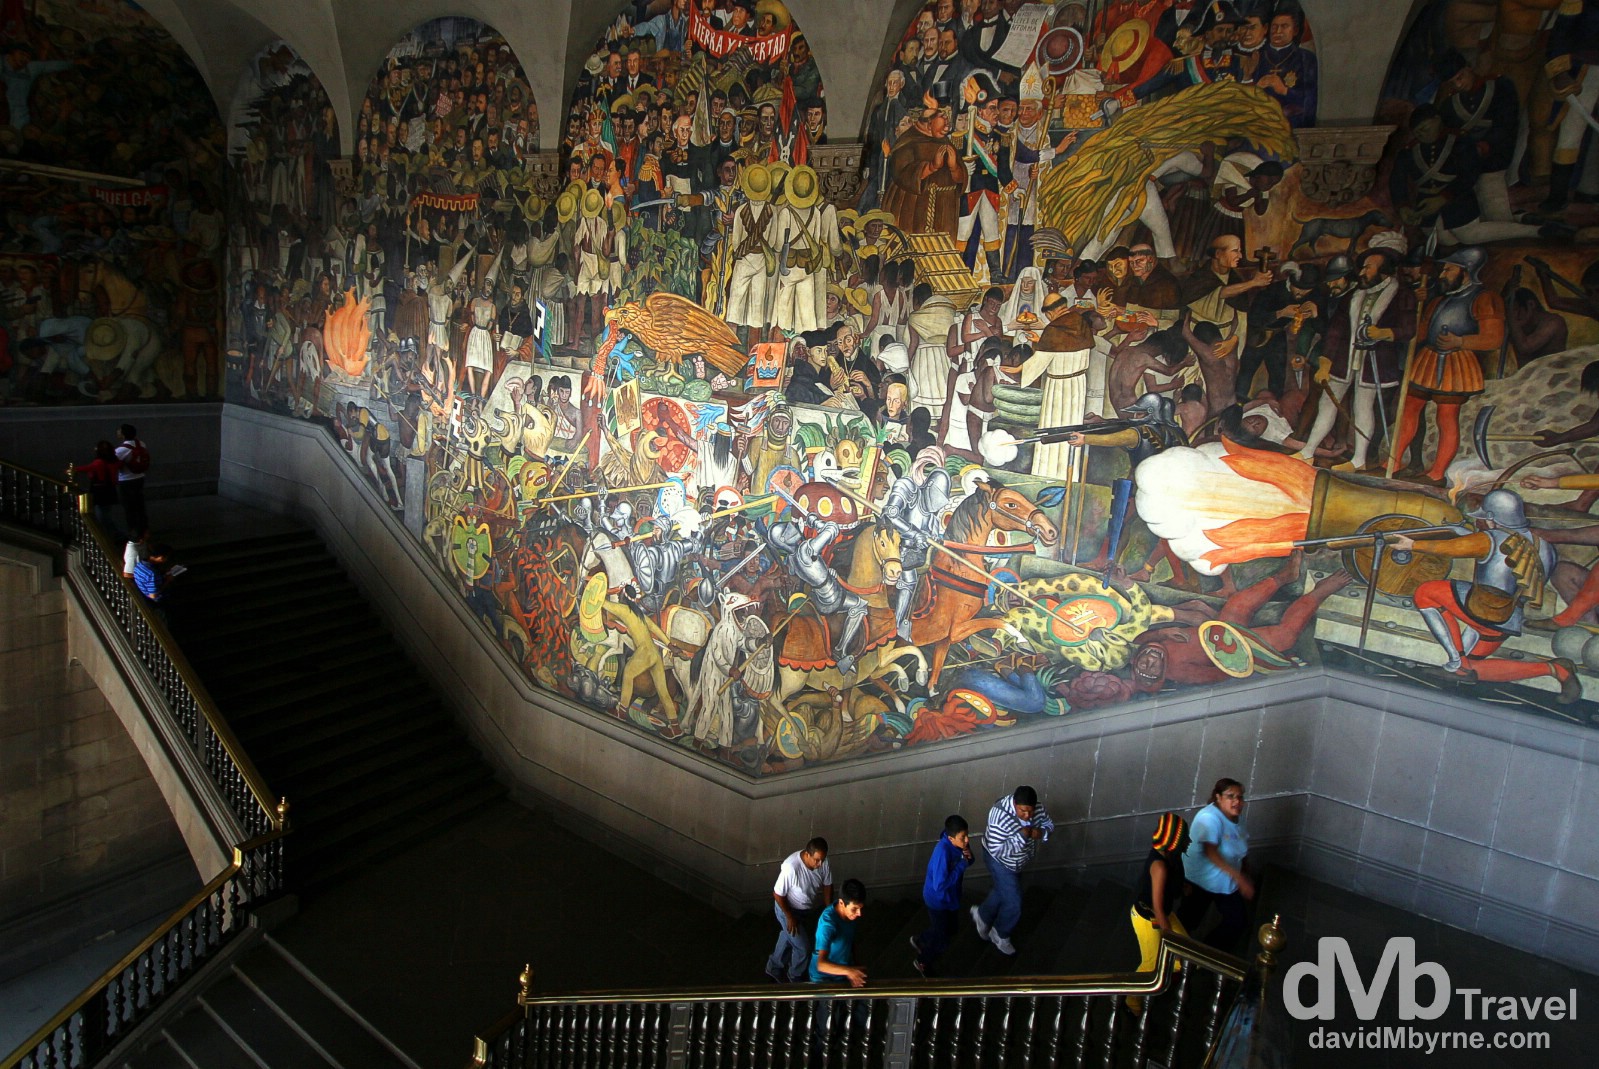 Murals from Diego Rivera, one of Mexico’s most famous artists of recent years, adorn the main staircase of the Palacio Nacional (The National Palace), the home of the offices of the Mexican President (Rivera murals can be found in numerous other buildings in the city). Centro Historico, Mexico City. April 28th 2013.